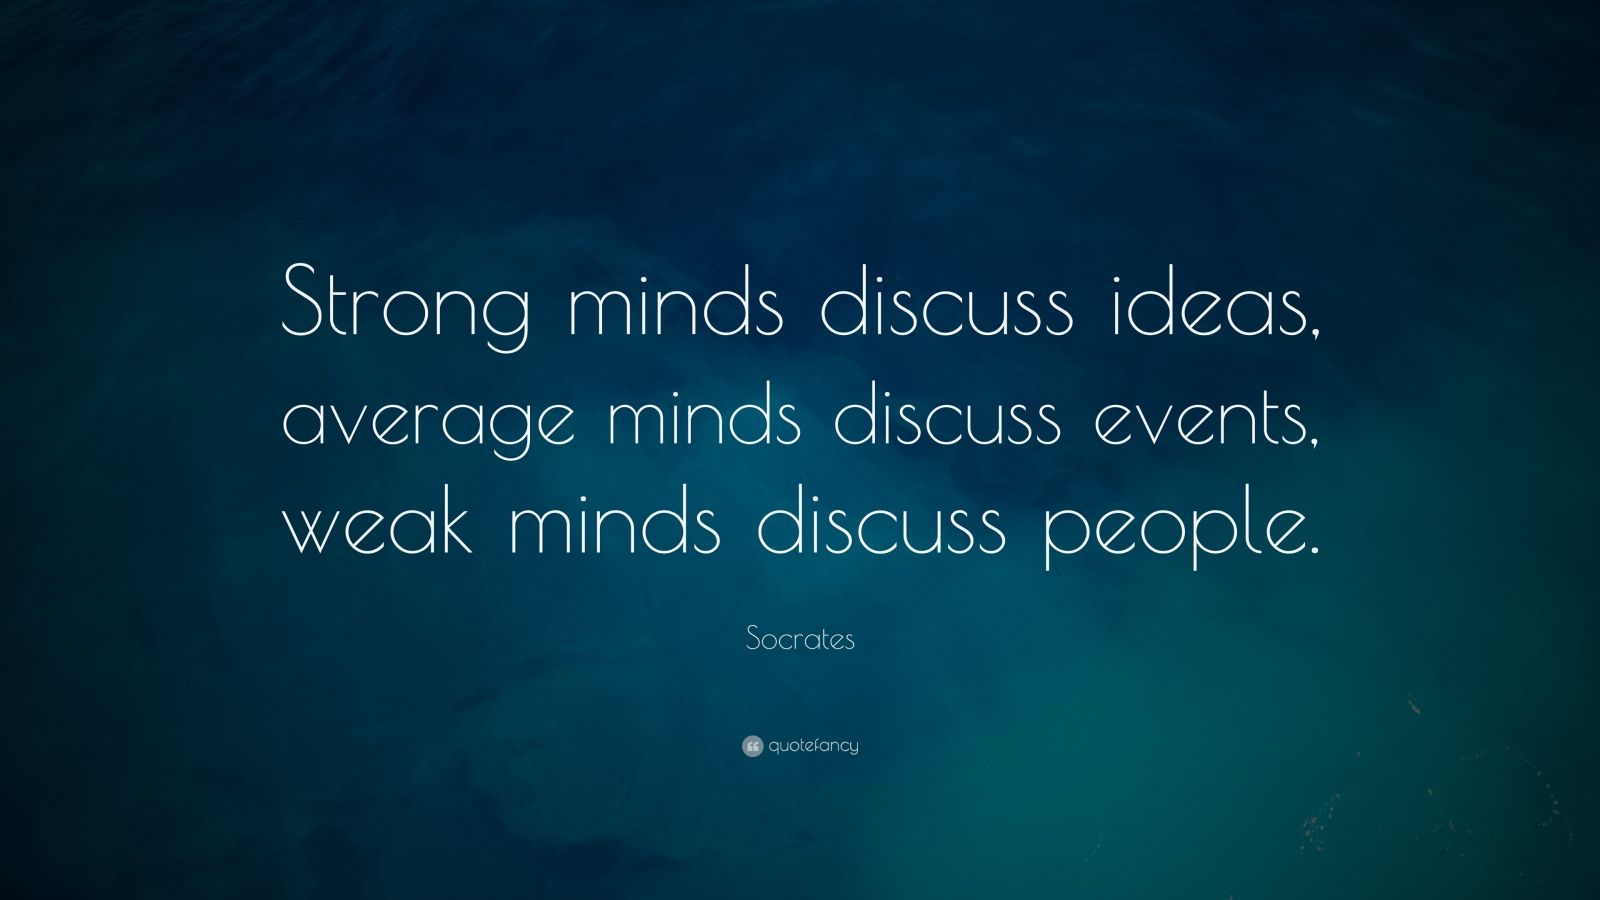 Image result for “Strong minds discuss ideas, average minds discuss events, weak minds discuss people.”